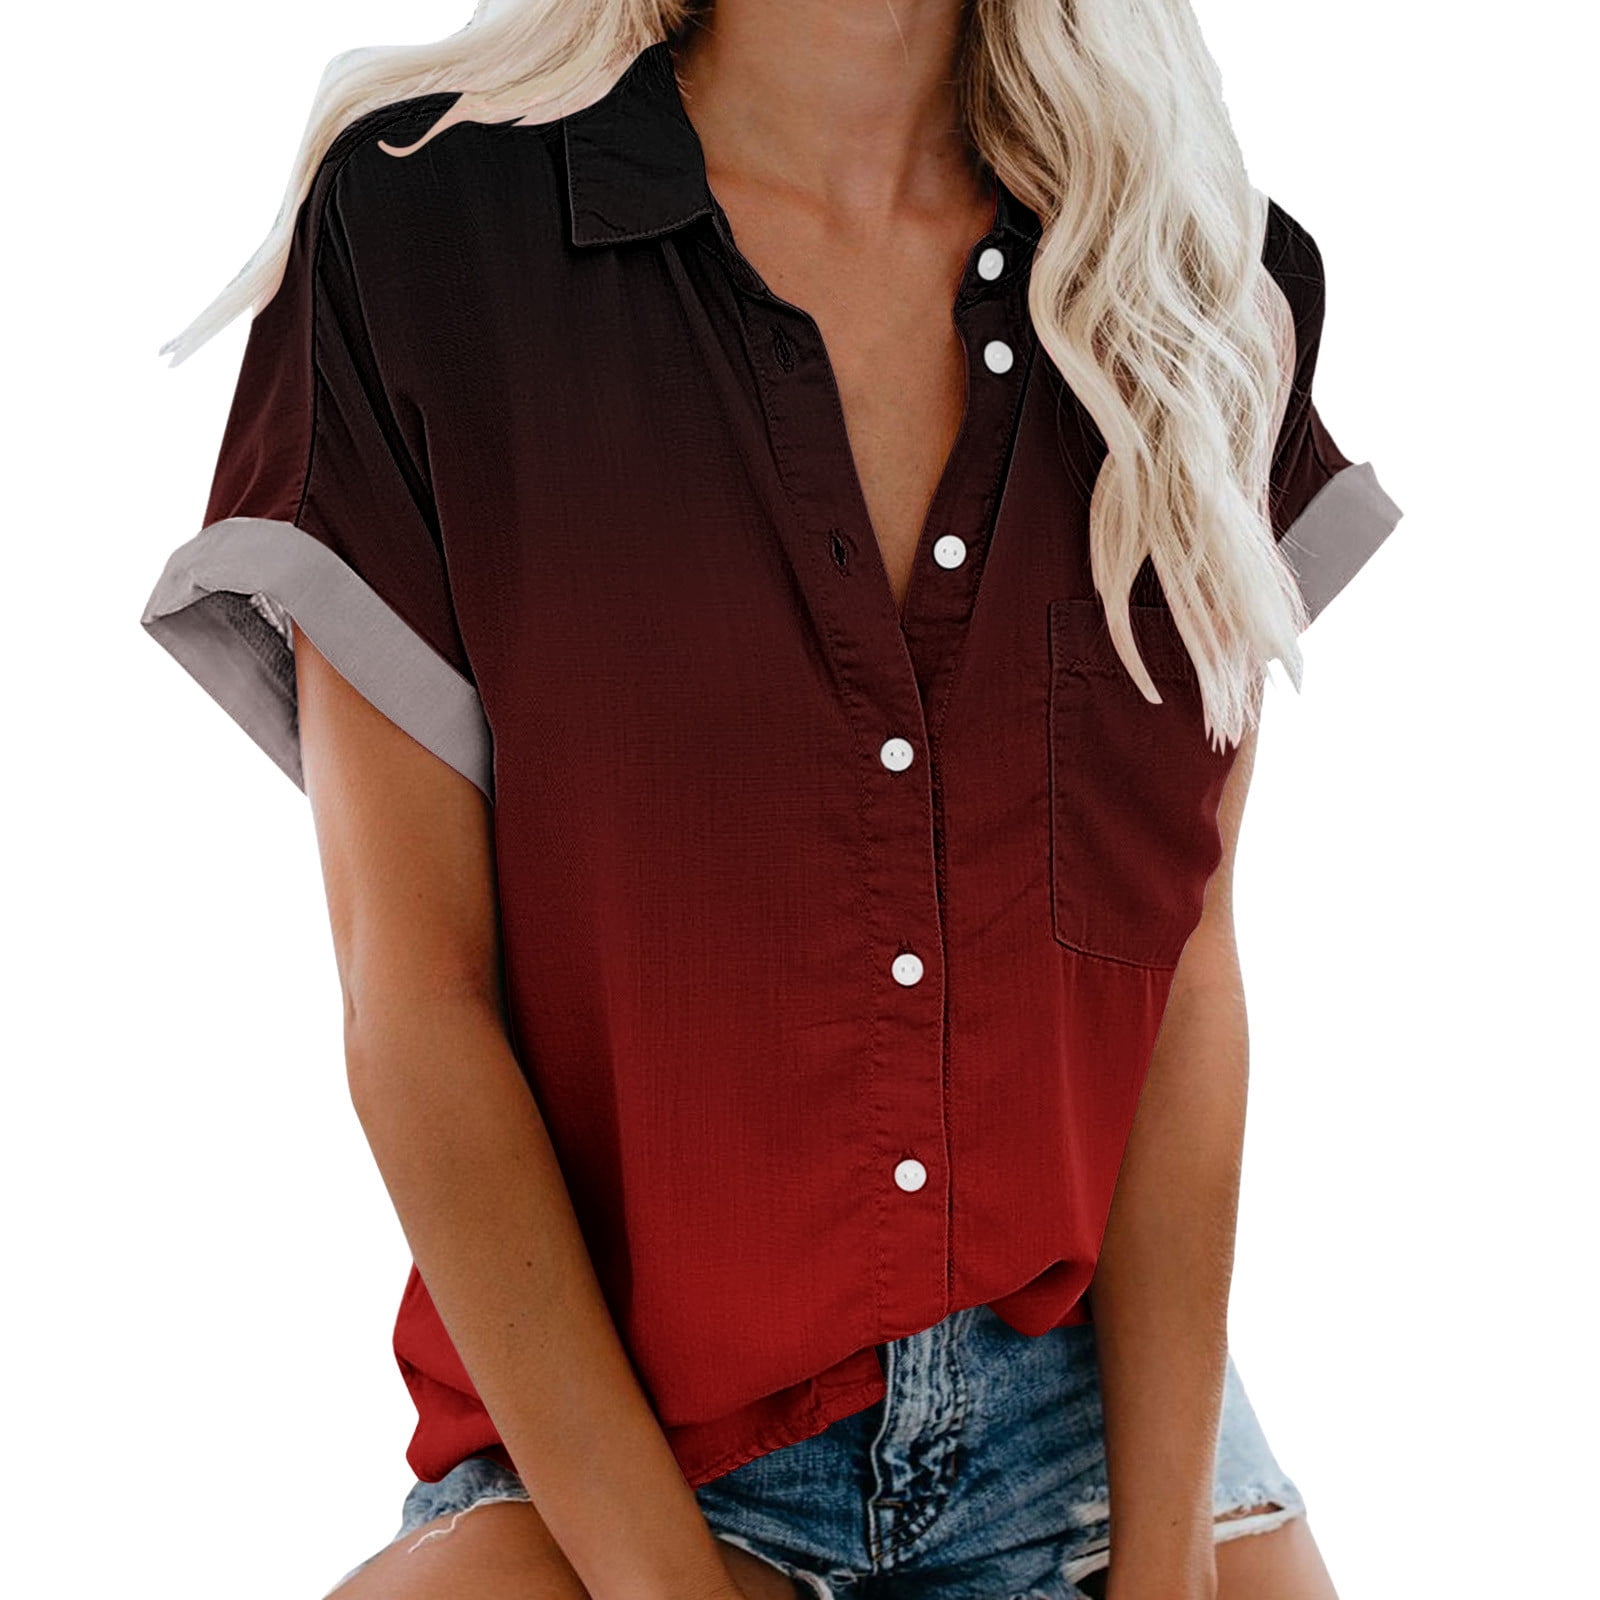 ZIZOCWA Nina Renee Lyday Storefront T Shirt Womens V Neck Womens Fashion  Short Sleeve Gradient Printing Pocket Button Tee Casual Popular Blouse Tops  Fall Flannels 